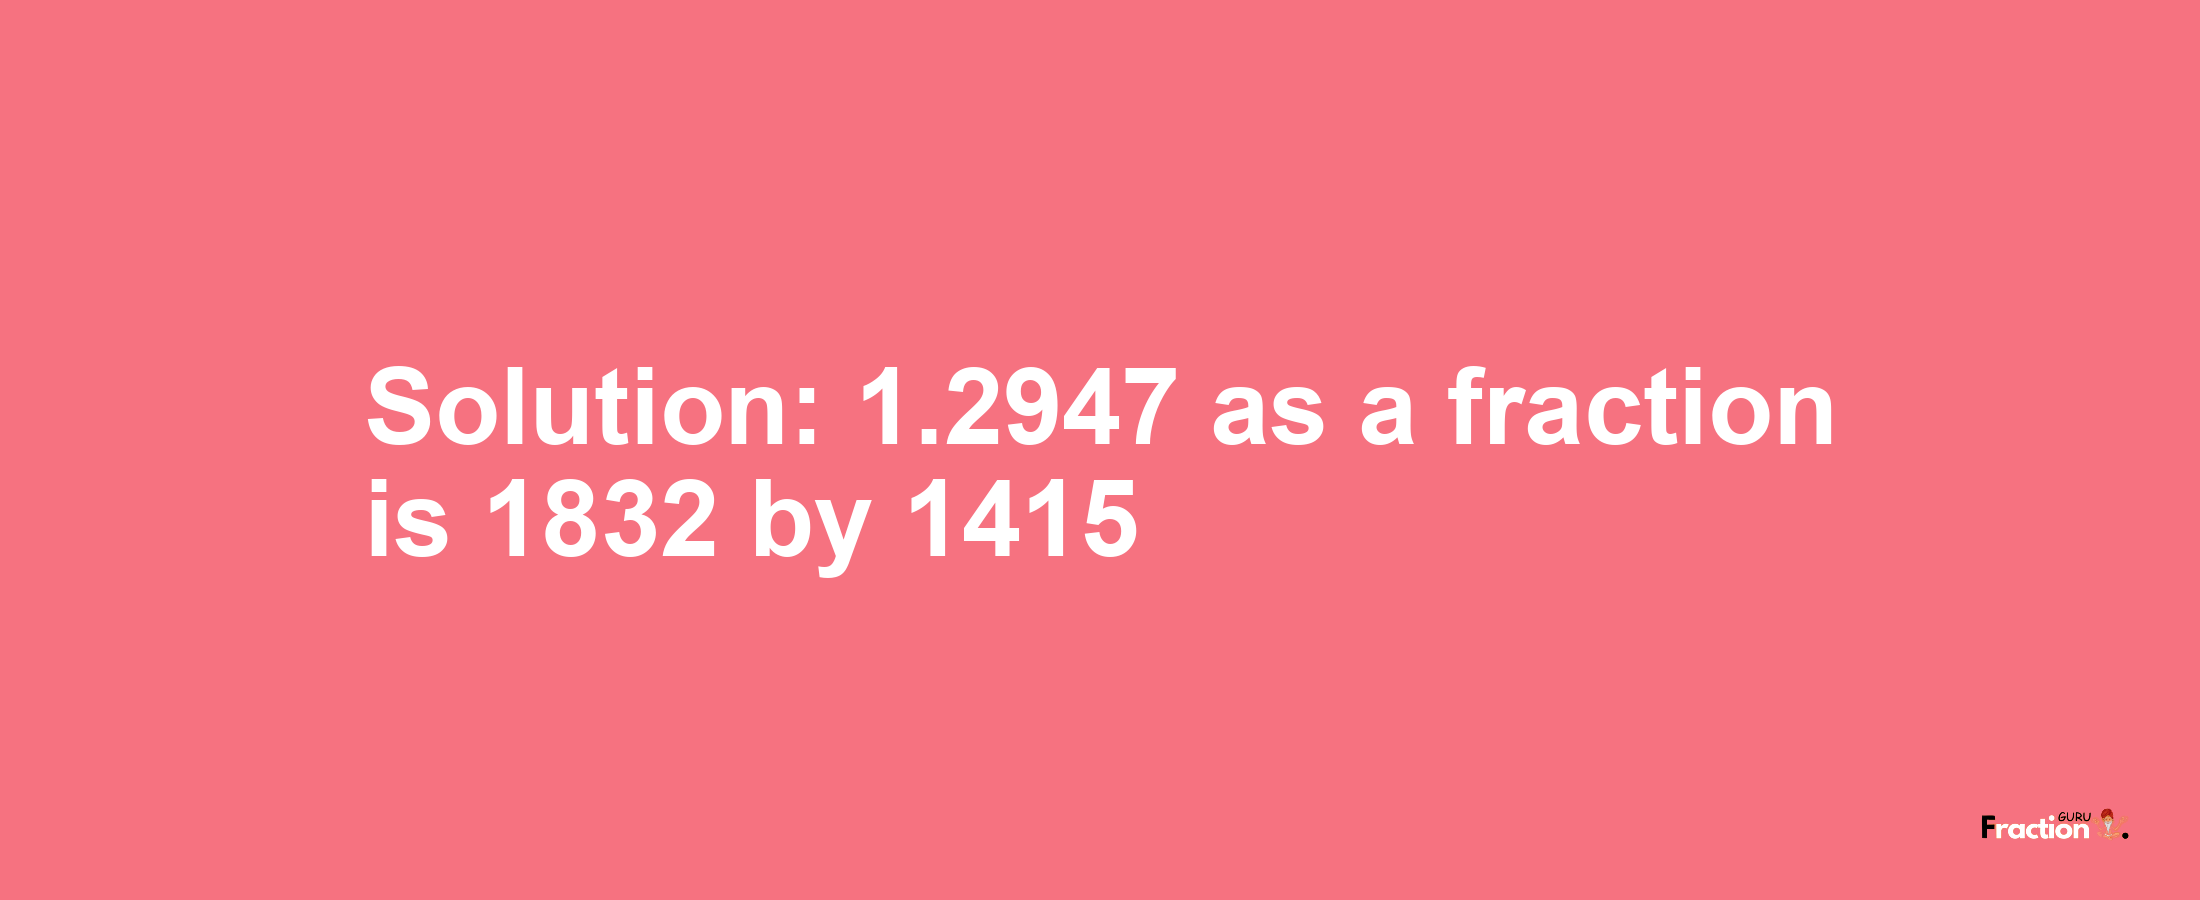 Solution:1.2947 as a fraction is 1832/1415